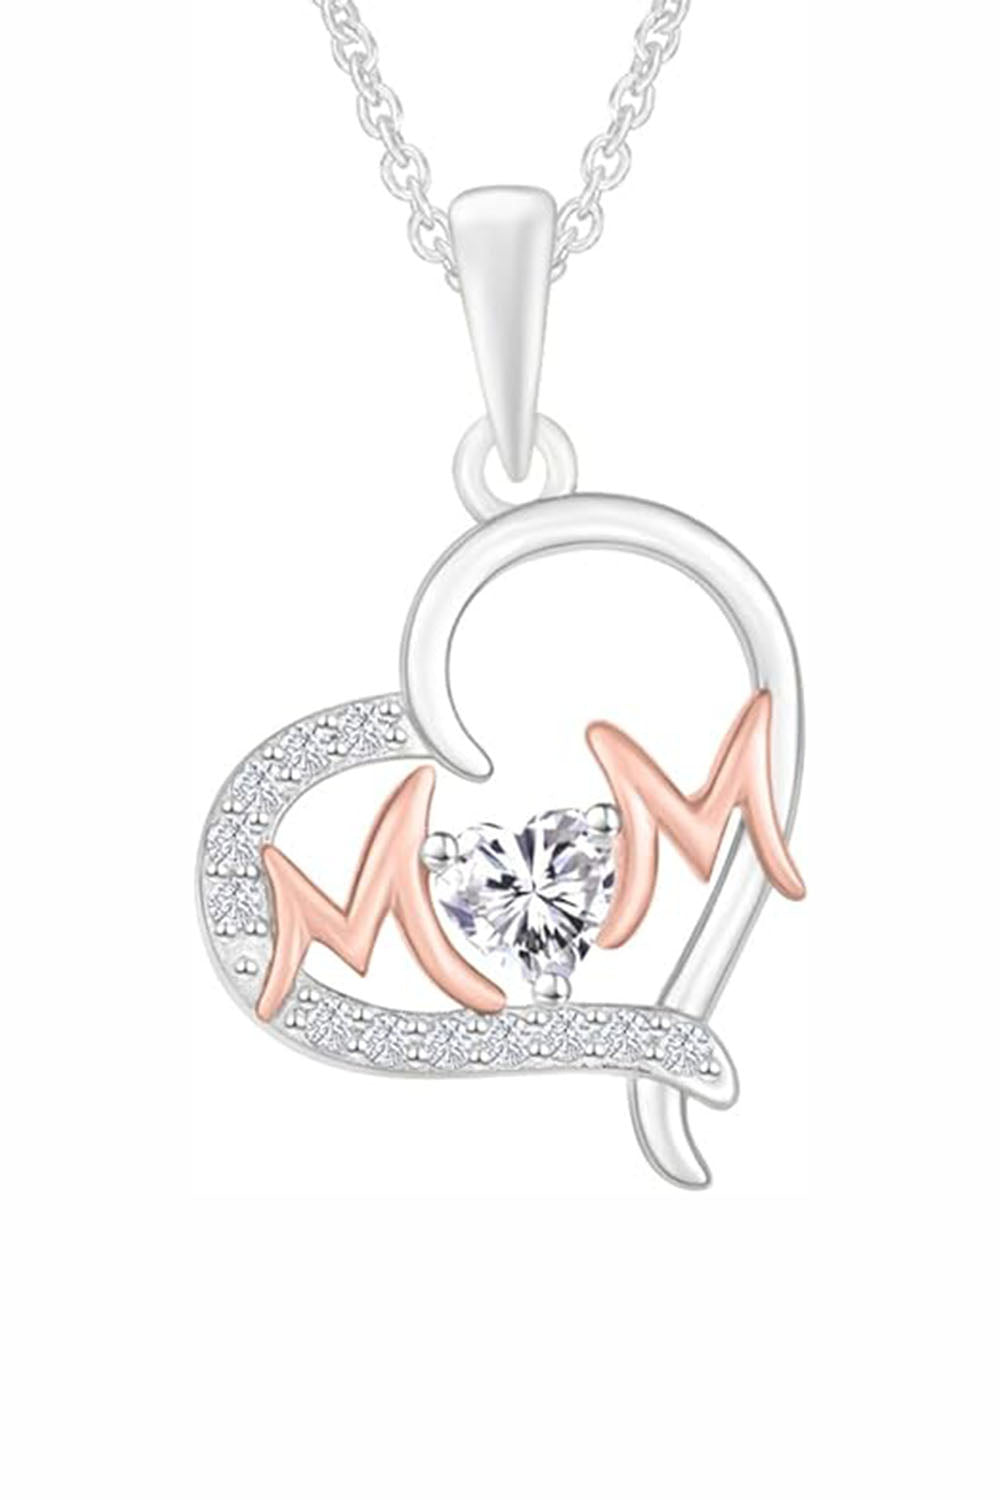 Yaathi 1/5 Carat Moissanite Mom Heart Pendant Necklace in 18k White Gold Over Sterling Silver Jewellery.